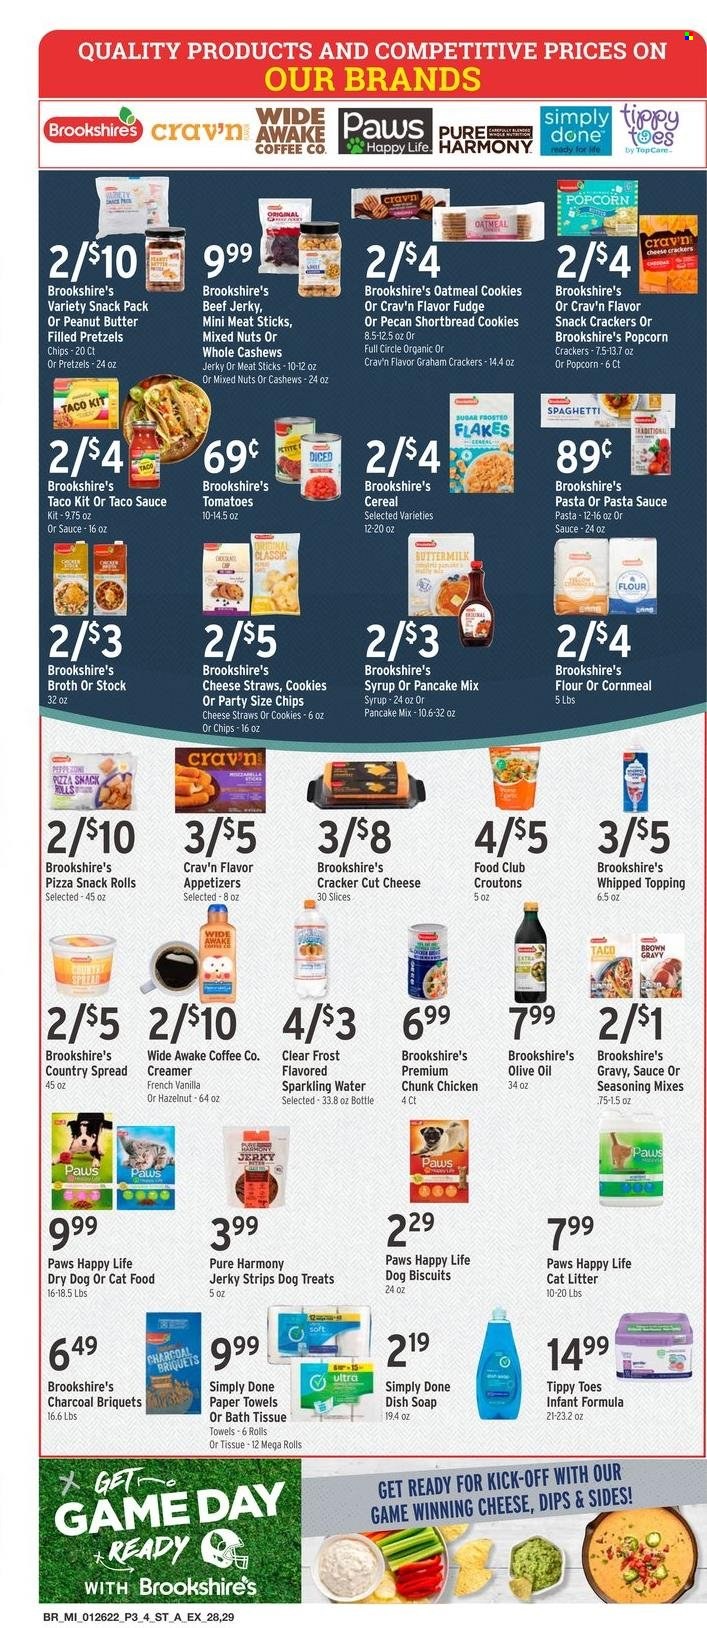 thumbnail - Brookshires Flyer - 01/26/2022 - 02/01/2022 - Sales products - pretzels, spaghetti, pizza, pasta sauce, pancakes, beef jerky, jerky, creamer, strips, cookies, fudge, graham crackers, crackers, chips, popcorn, croutons, oatmeal, topping, broth, cereals, spice, taco sauce, olive oil, oil, peanut butter, syrup, cashews, mixed nuts, sparkling water, coffee, bath tissue, kitchen towels, paper towels, soap, straw, cat litter, Paws, animal food, animal treats, cat food, dog food, dog biscuits, Pure Harmony. Page 3.